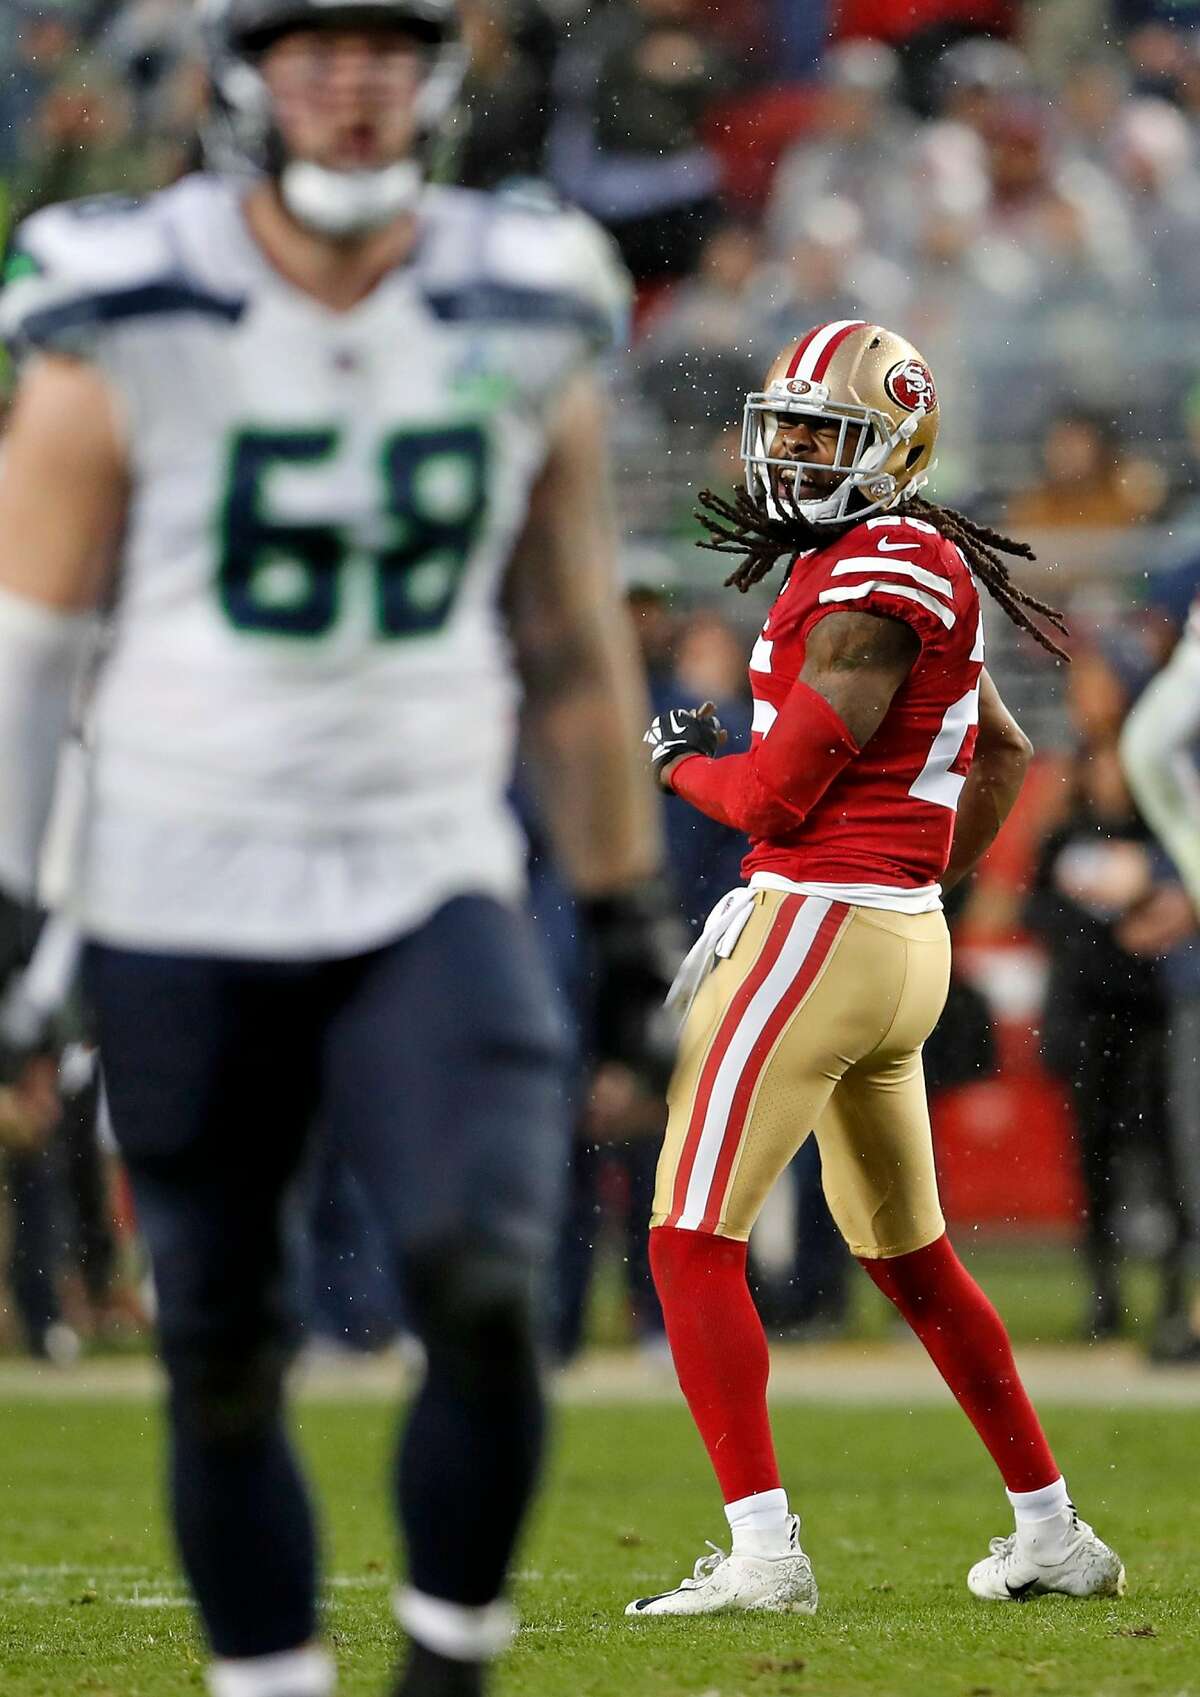 San Francisco 49ers' Richard Sherman enjoys a penalty call on Seattle Seahawks in overtime during Niners' 26-23 win in NFL game at Levi's Stadium in Santa Clara, Calif. on Sunday, December 16, 2018.